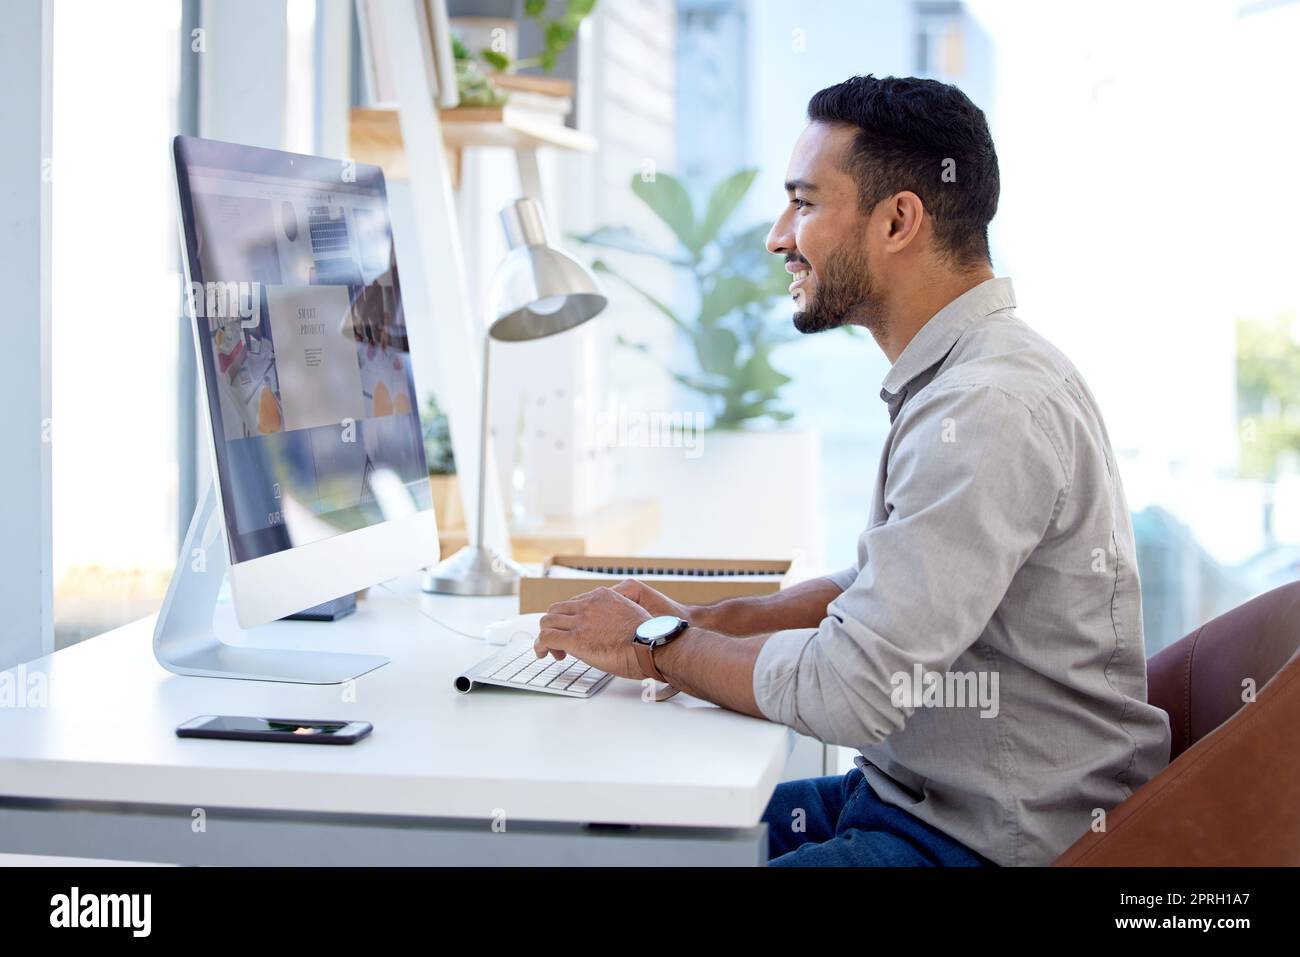 Ambitious and driven to get things done. a young businessman working on a computer in an office Stock Photo